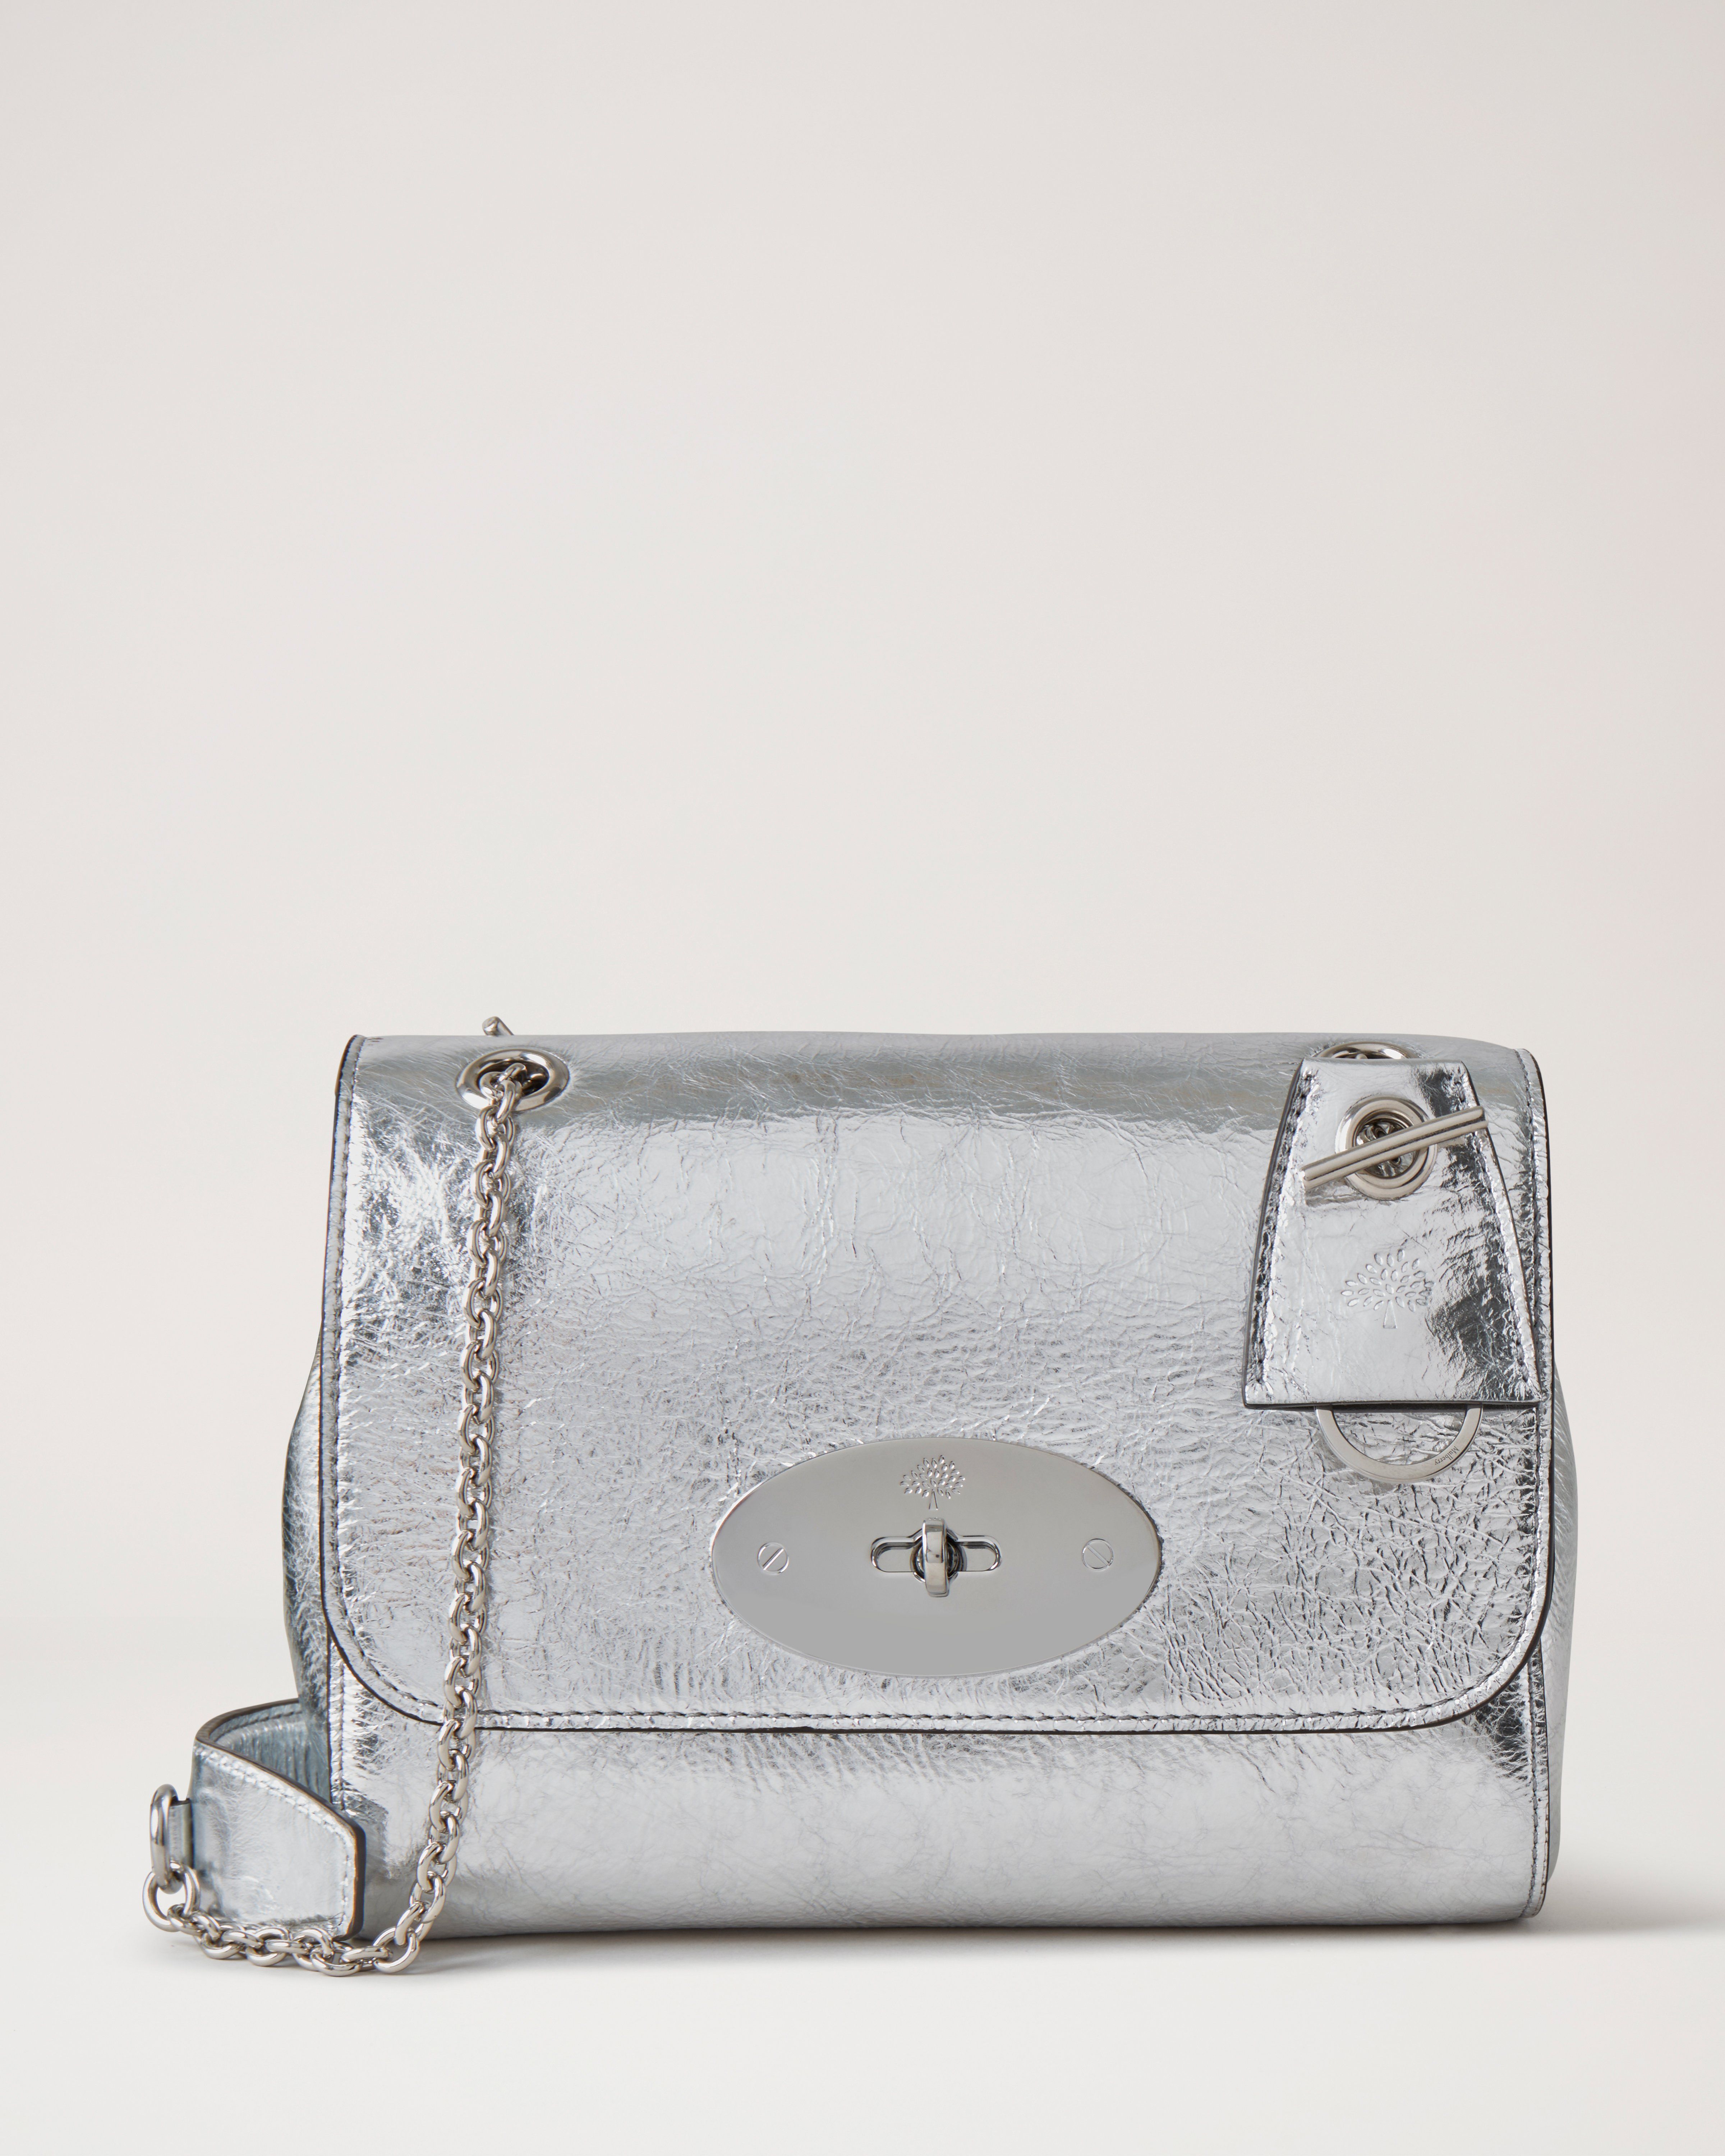 Bags & Silver from Lily Bags Marmaris #luxurybrands #dadlovesfood #fas